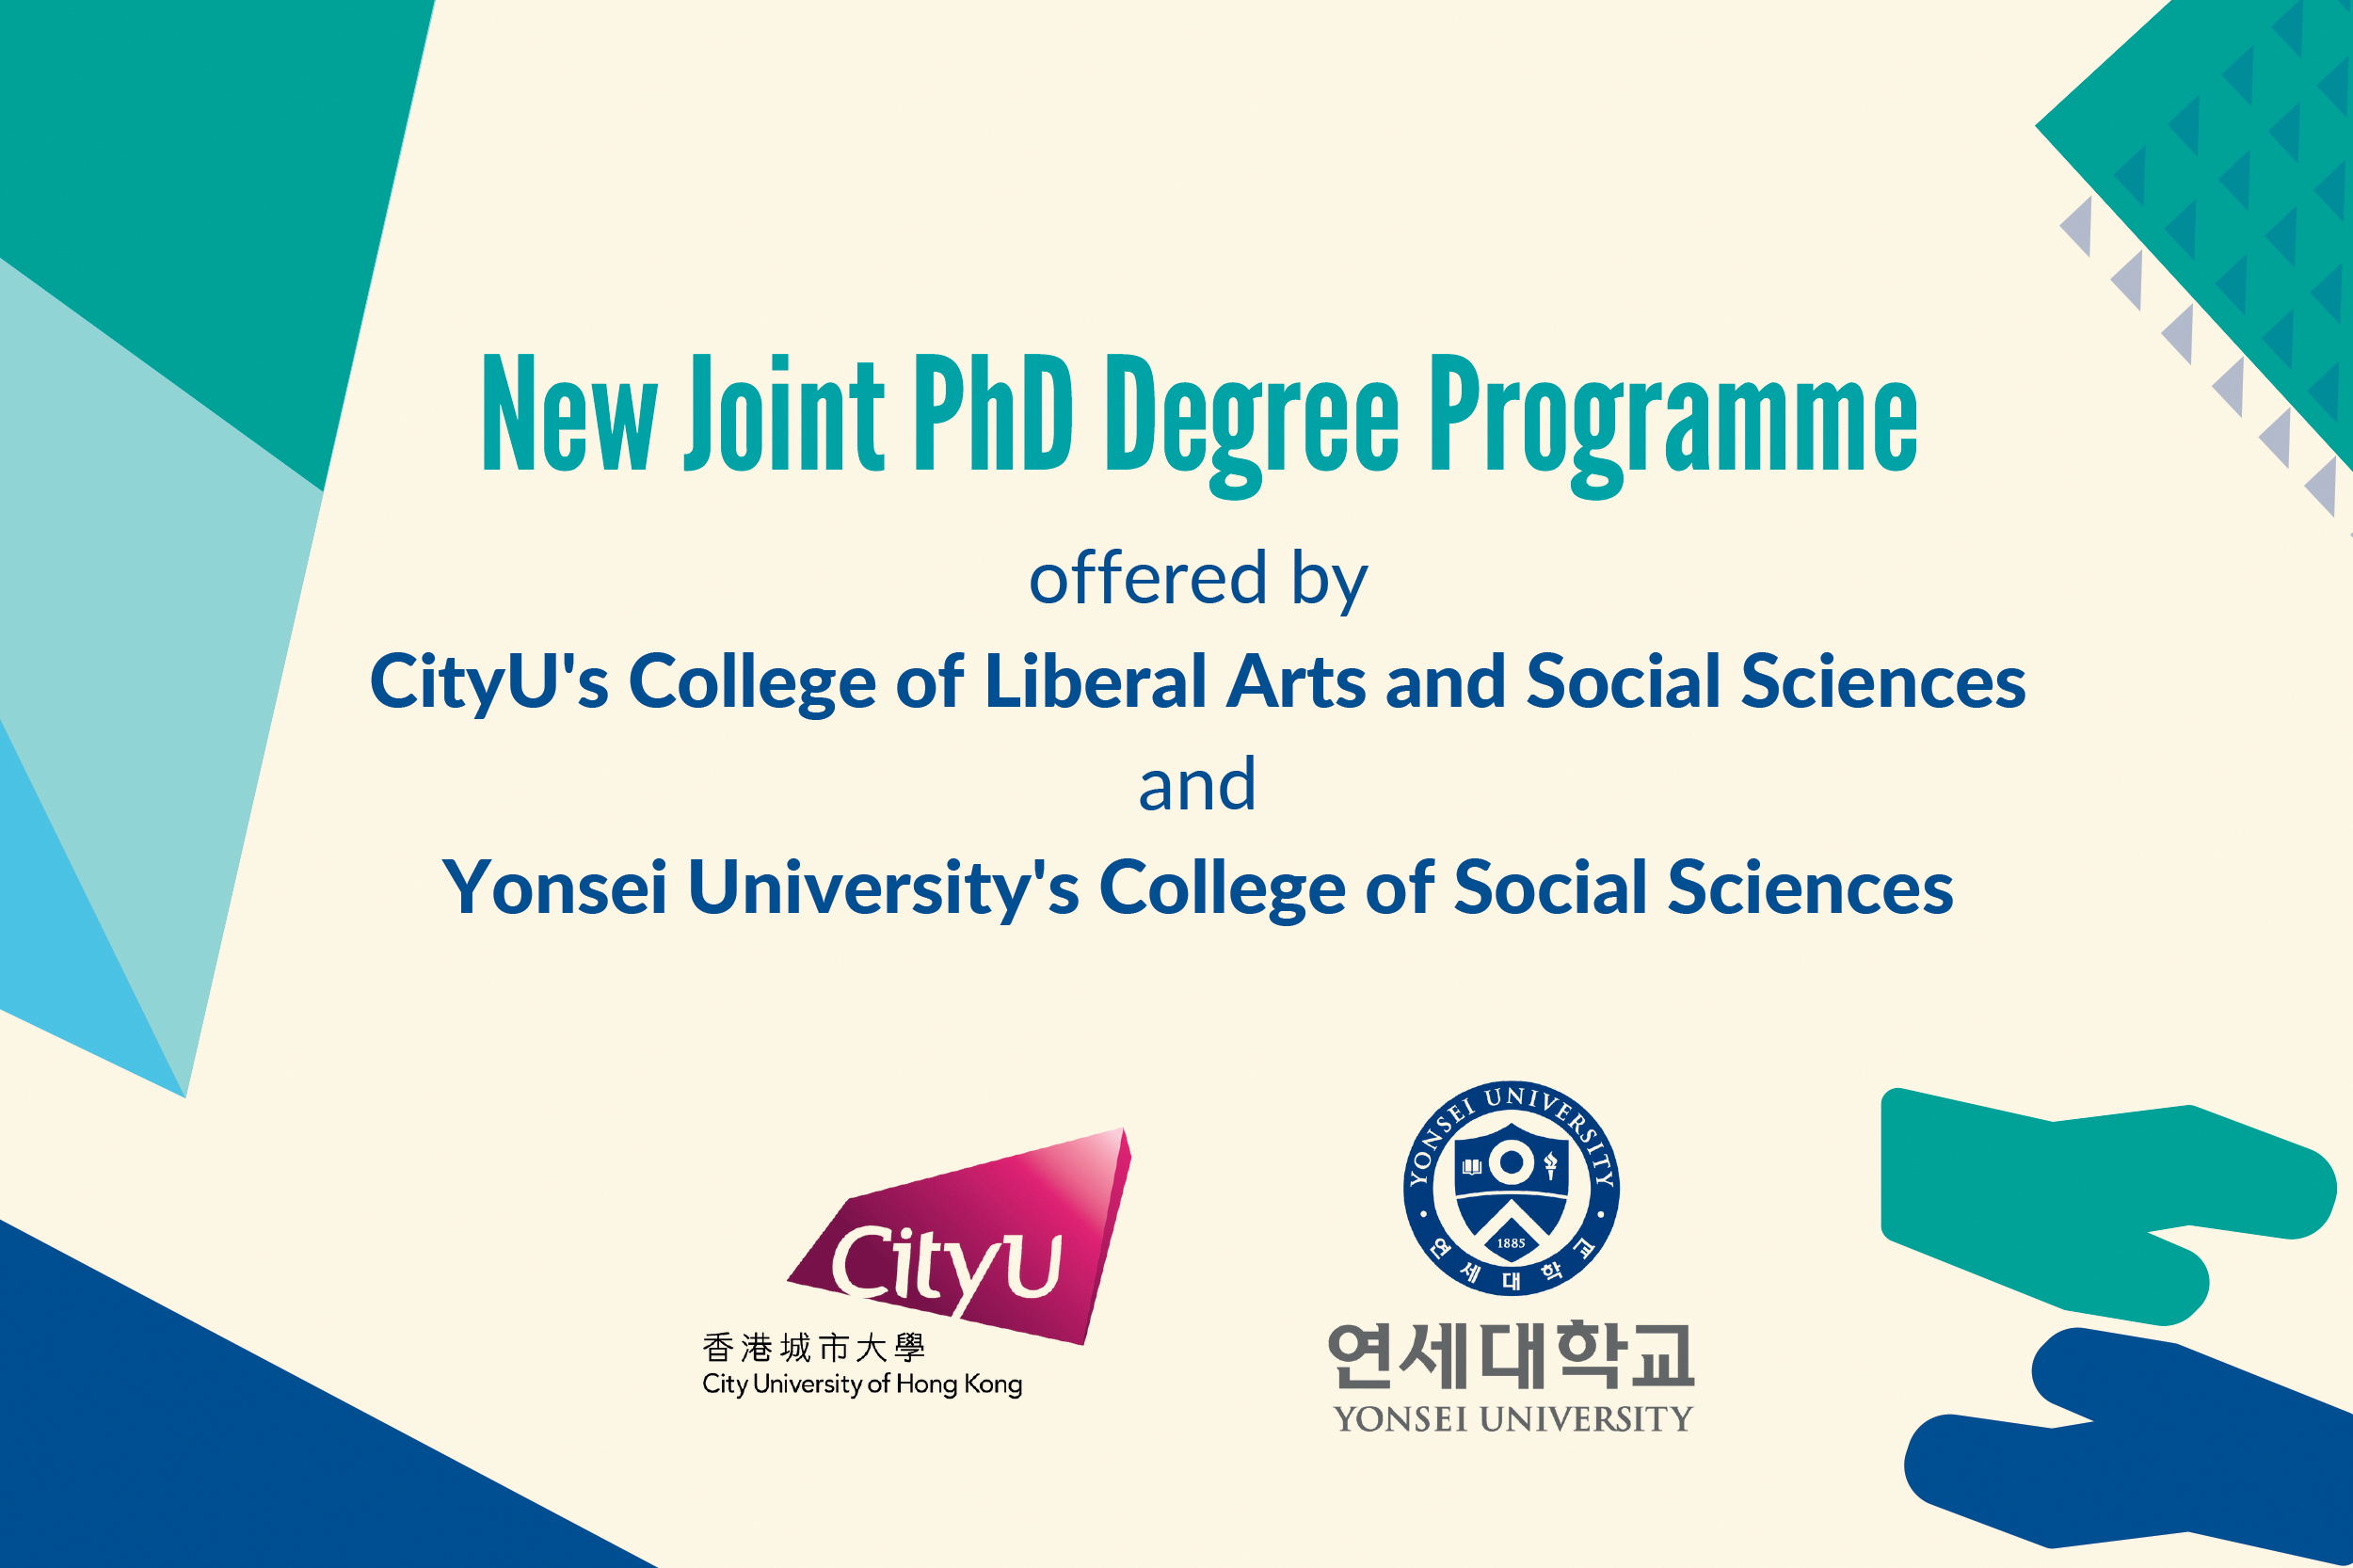 The new Joint PhD Programme is expected to deepen academic collaboration between the two institutions.